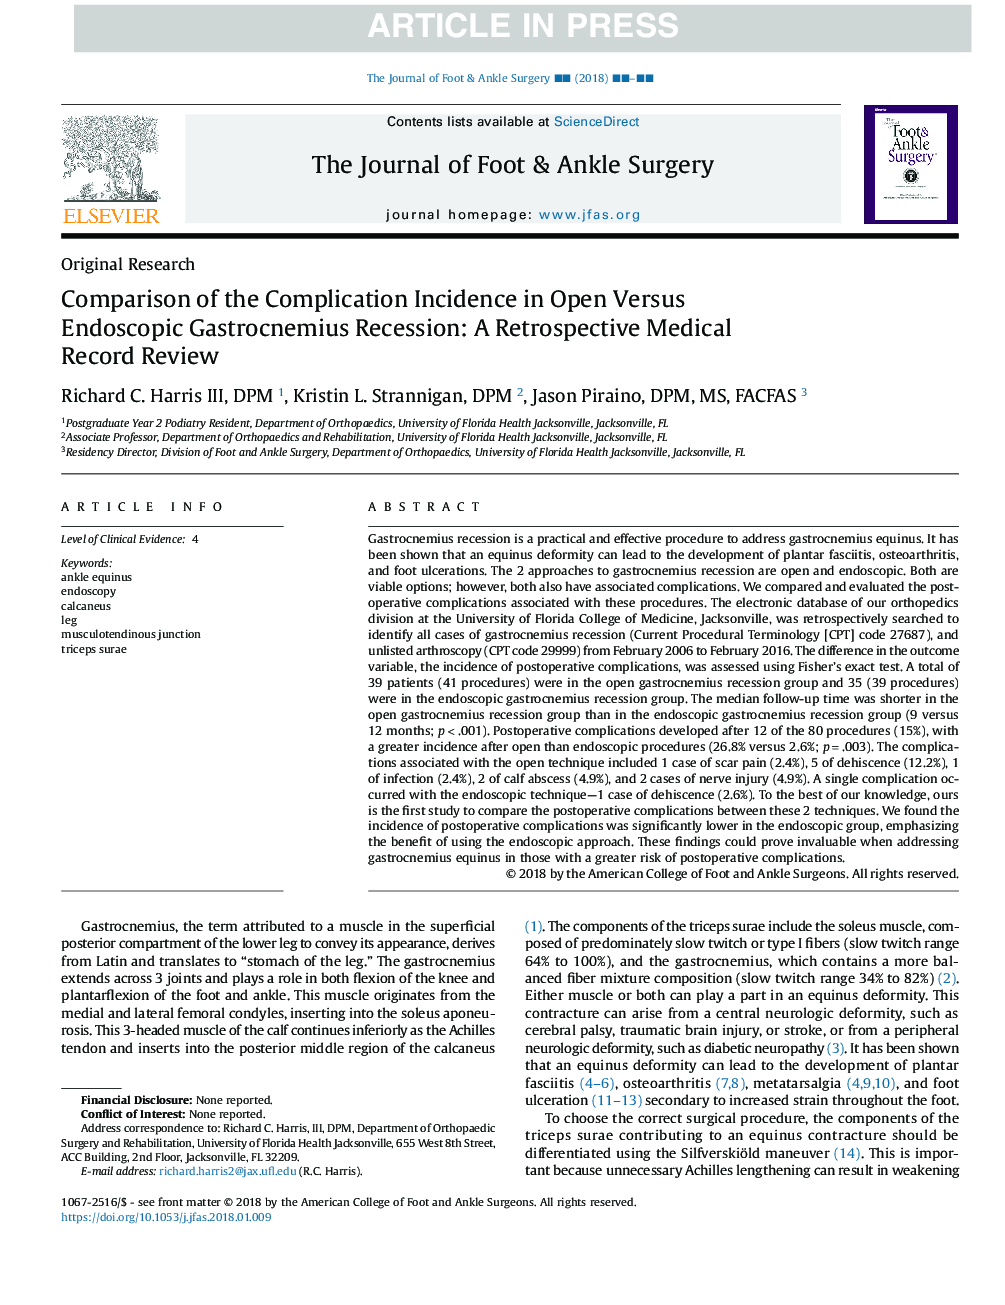 Comparison of the Complication Incidence in Open Versus Endoscopic Gastrocnemius Recession: A Retrospective Medical Record Review